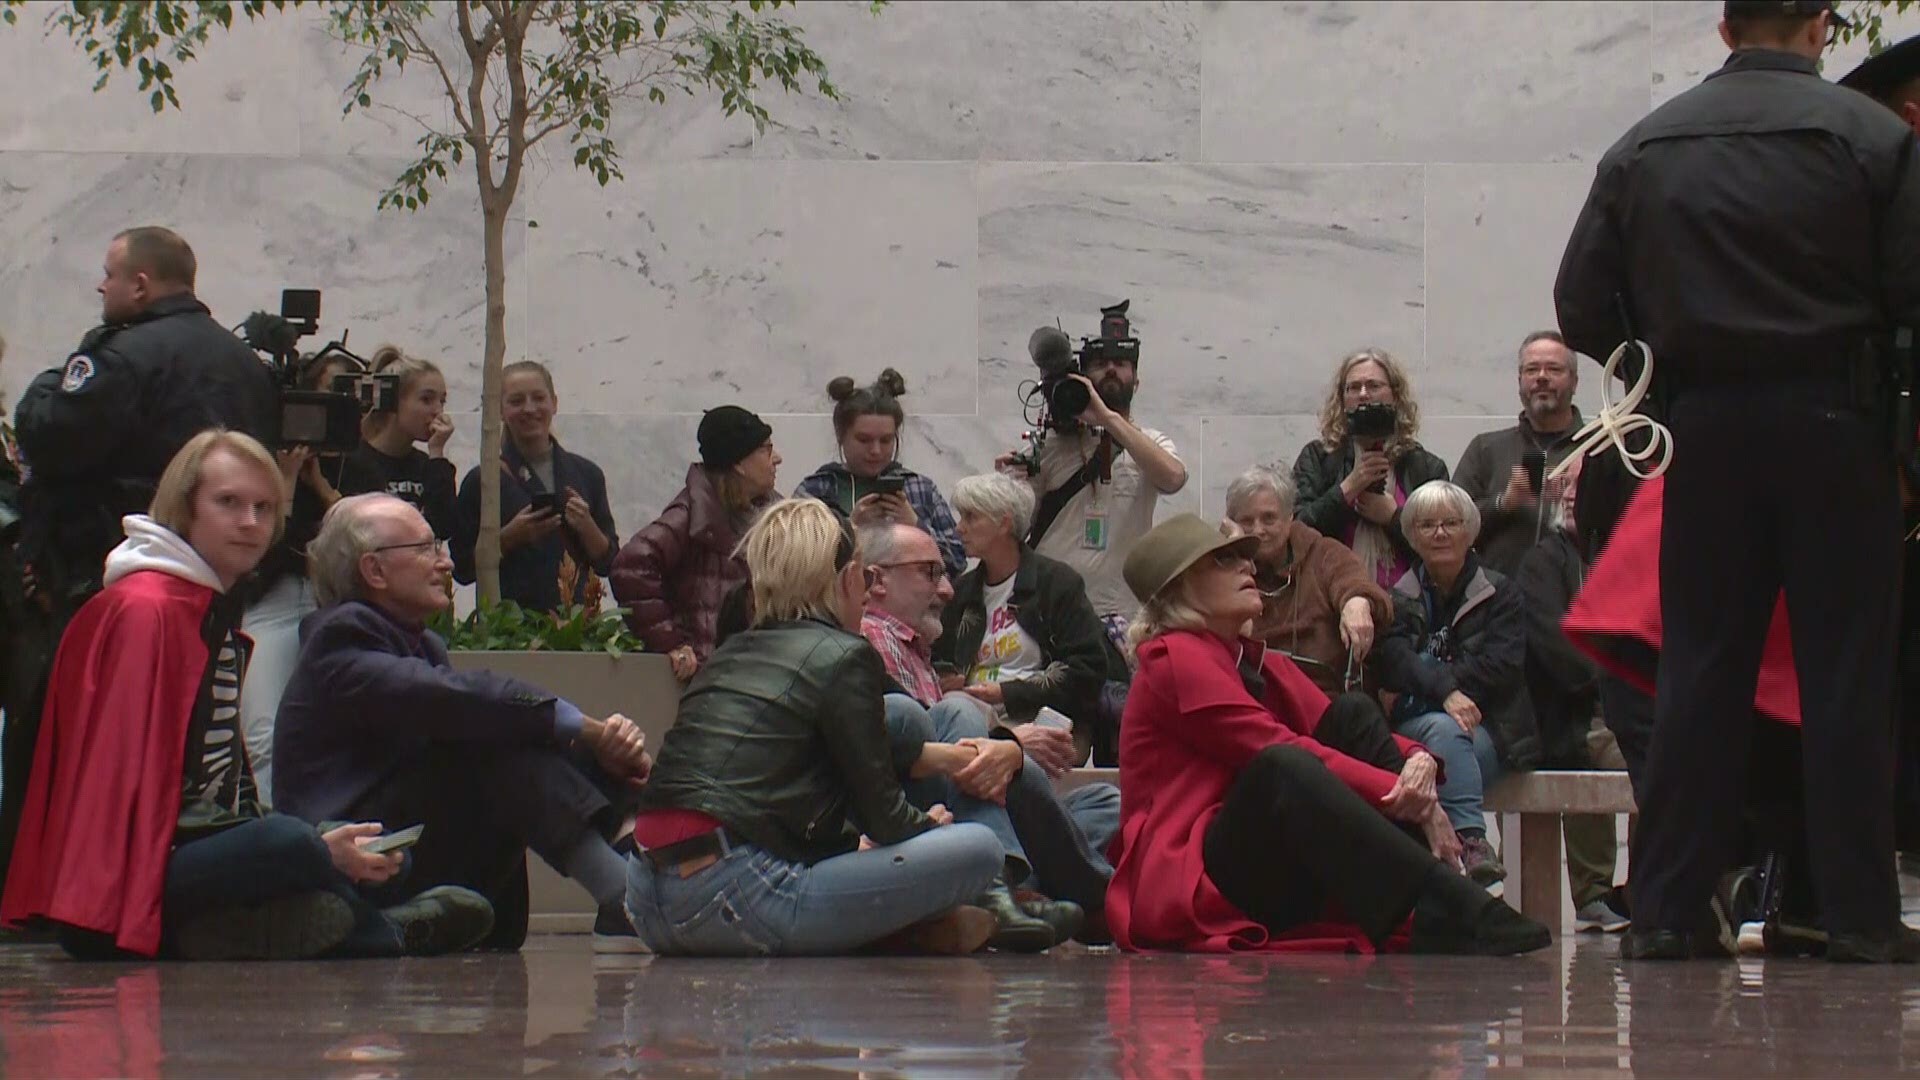 Jane Fonda continues her routine Friday arrest at the the Hart Senate Office Building during a climate change protest.